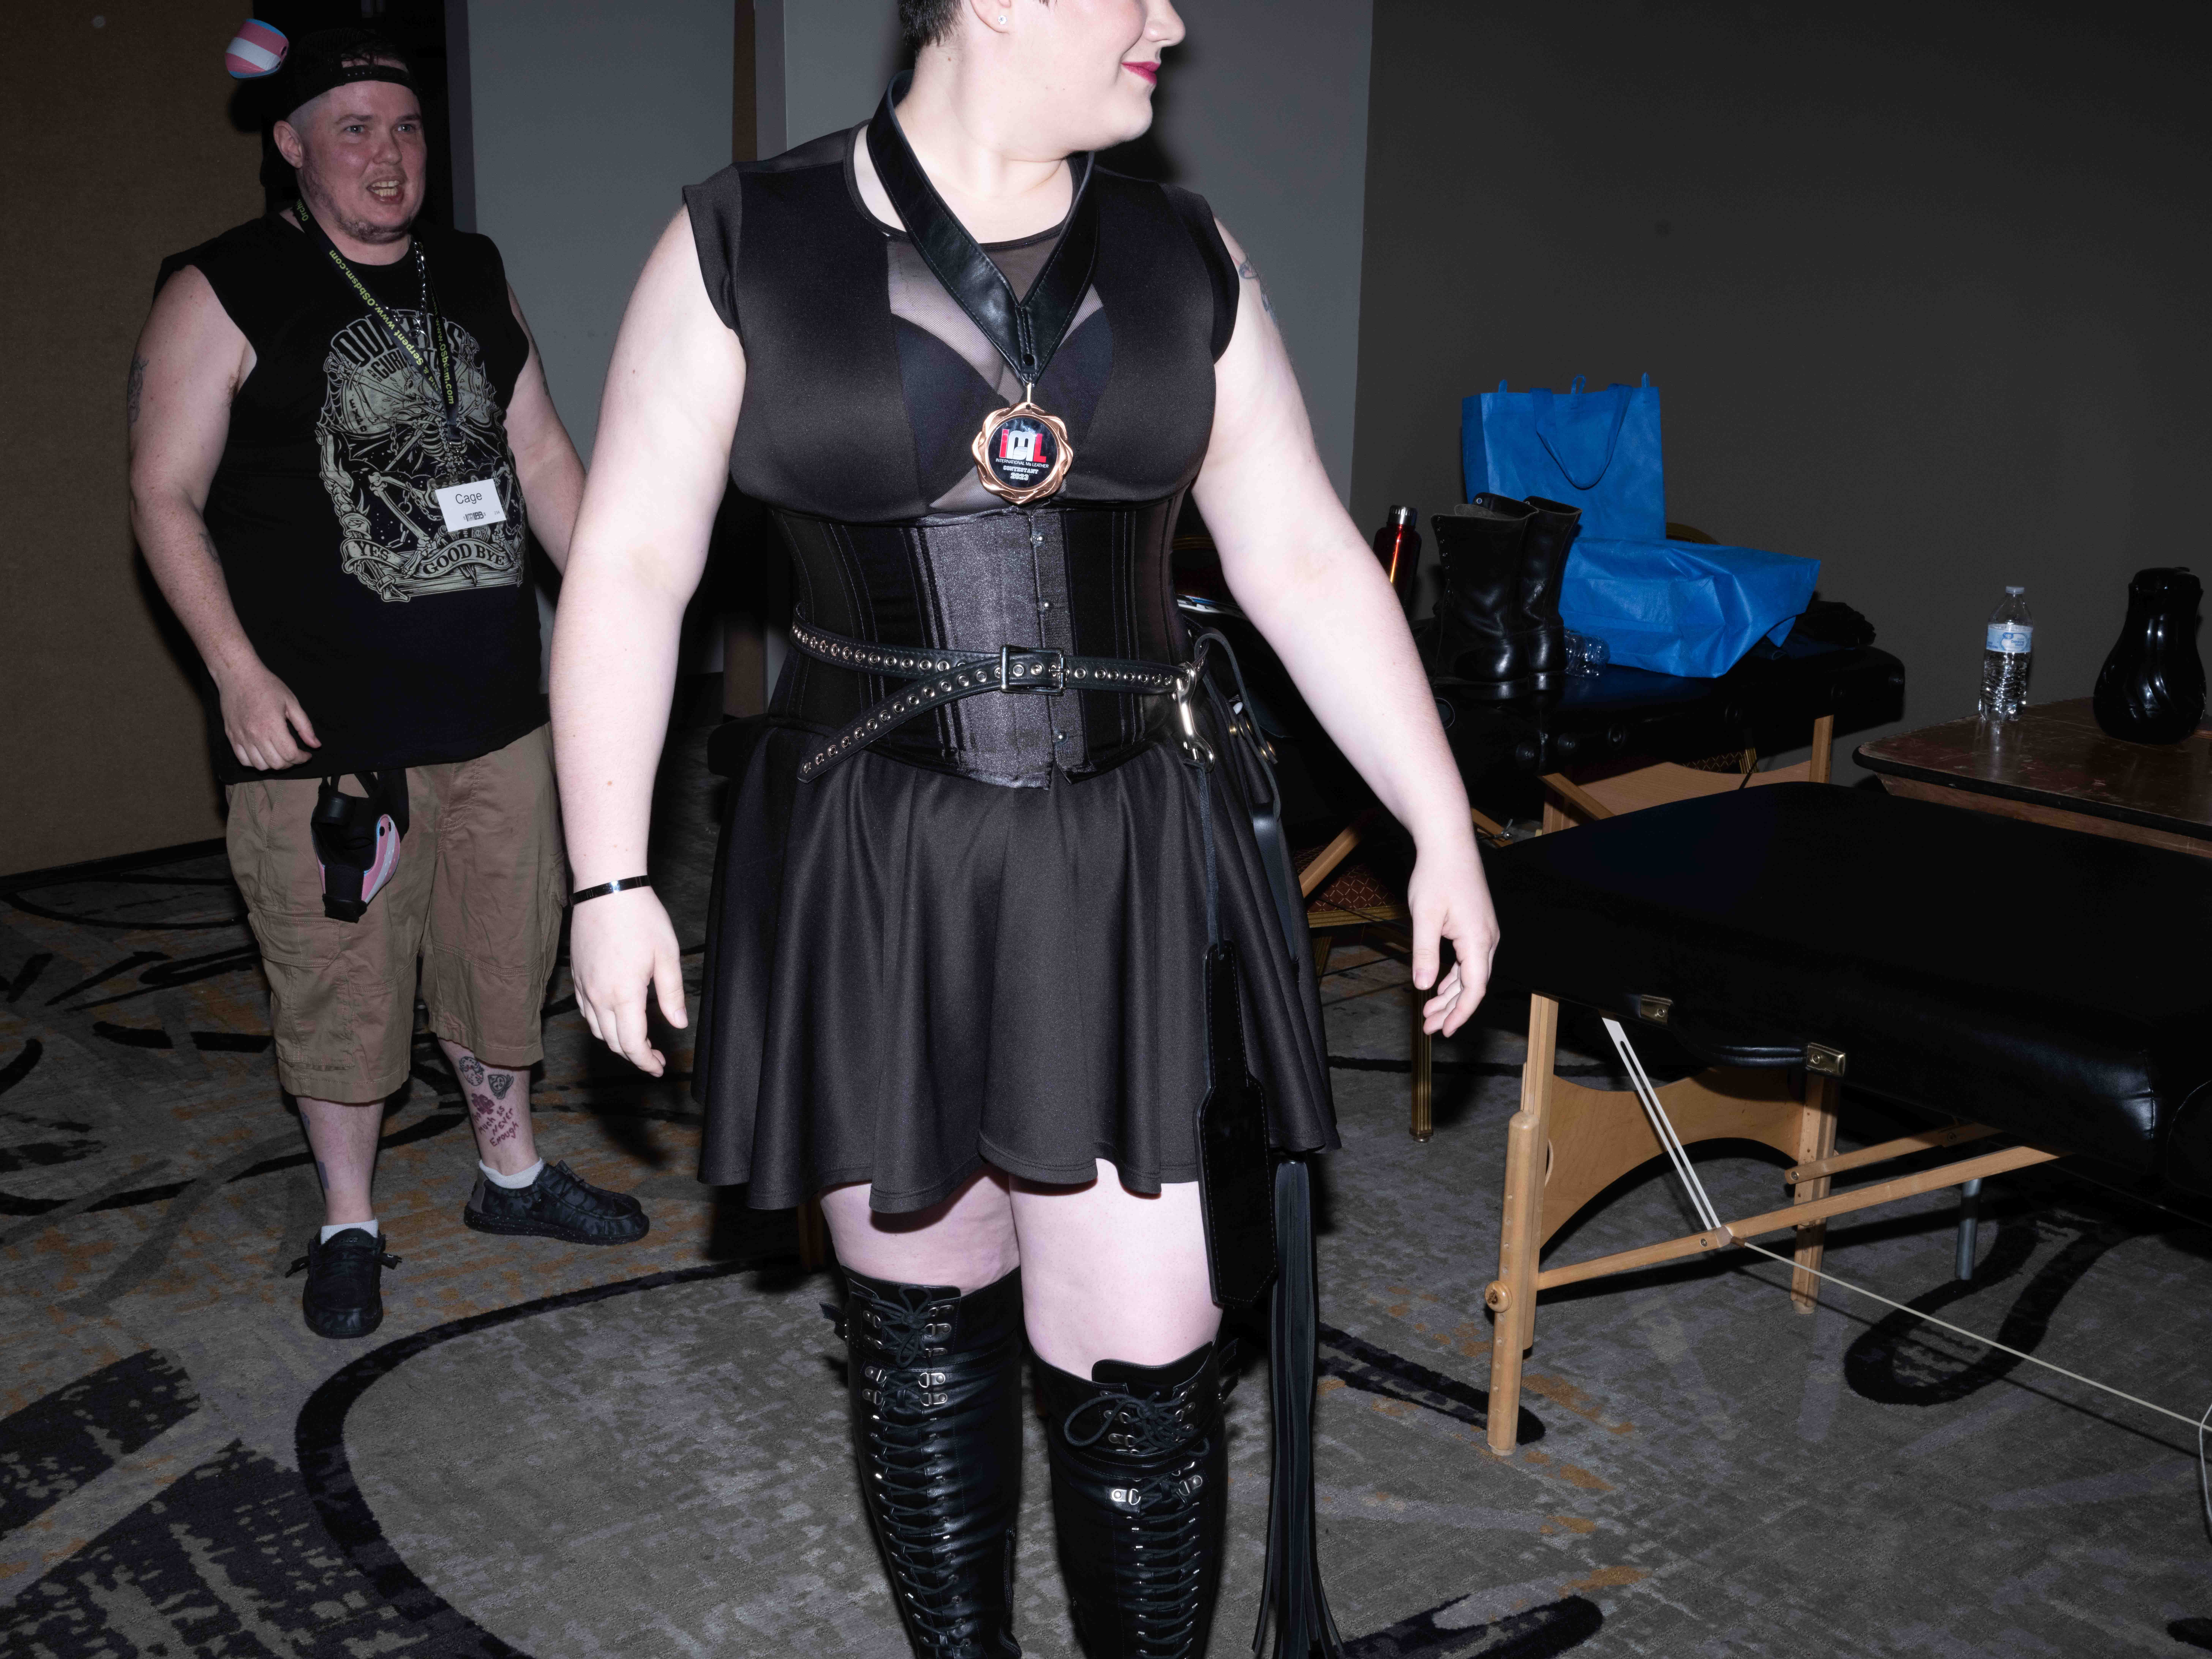 A woman walks towards the camera with her face obscured, she's wearing a black corset with leather boots and a whip off her hip. She's wearing an IMsLBB medal around her neck.